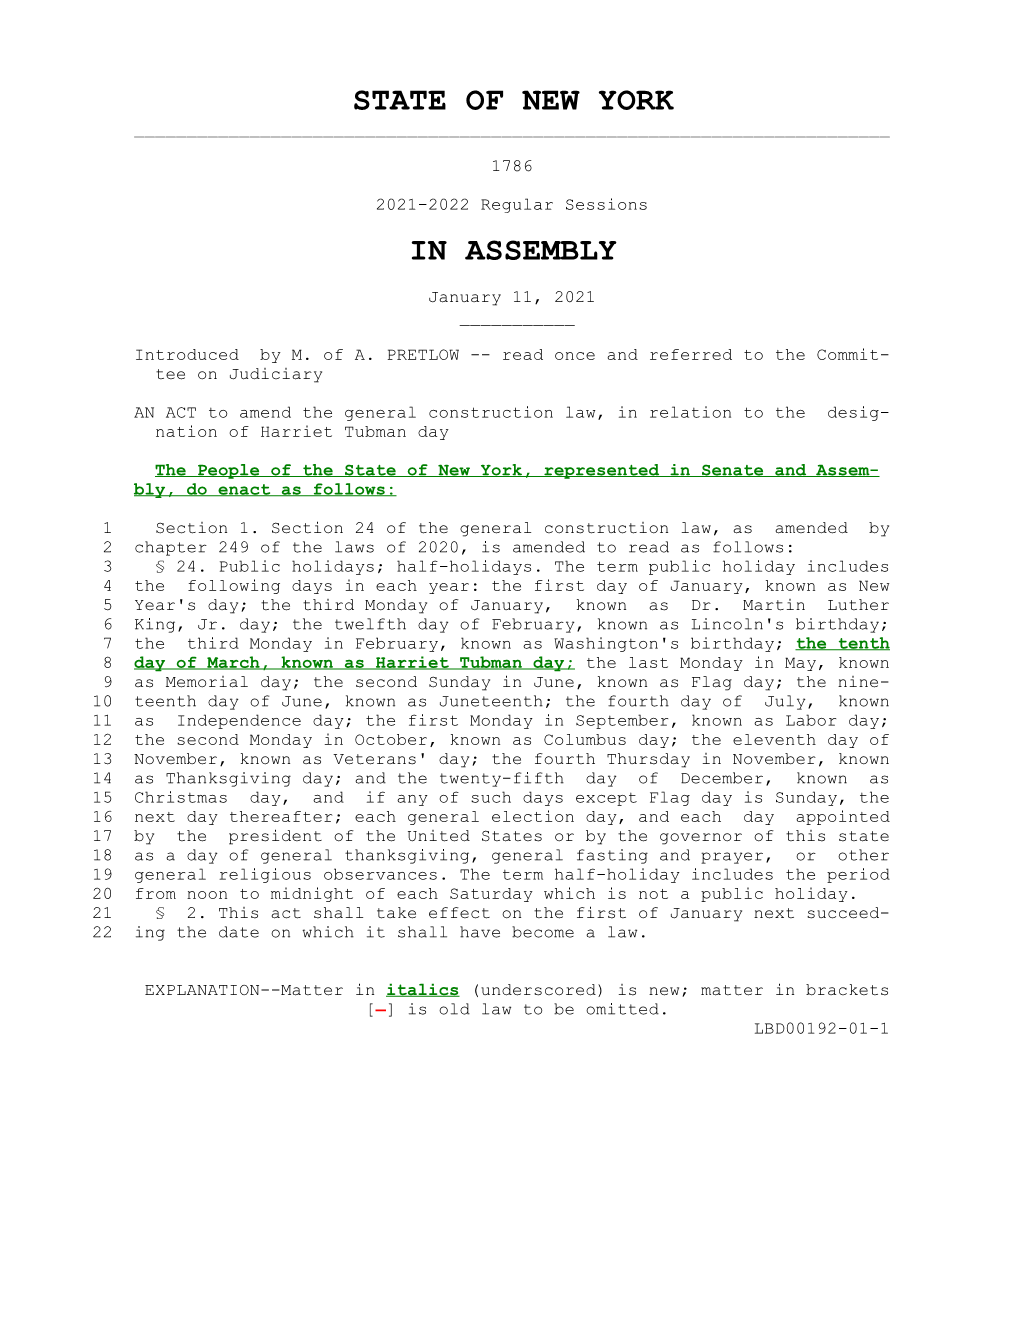 State of New York in Assembly